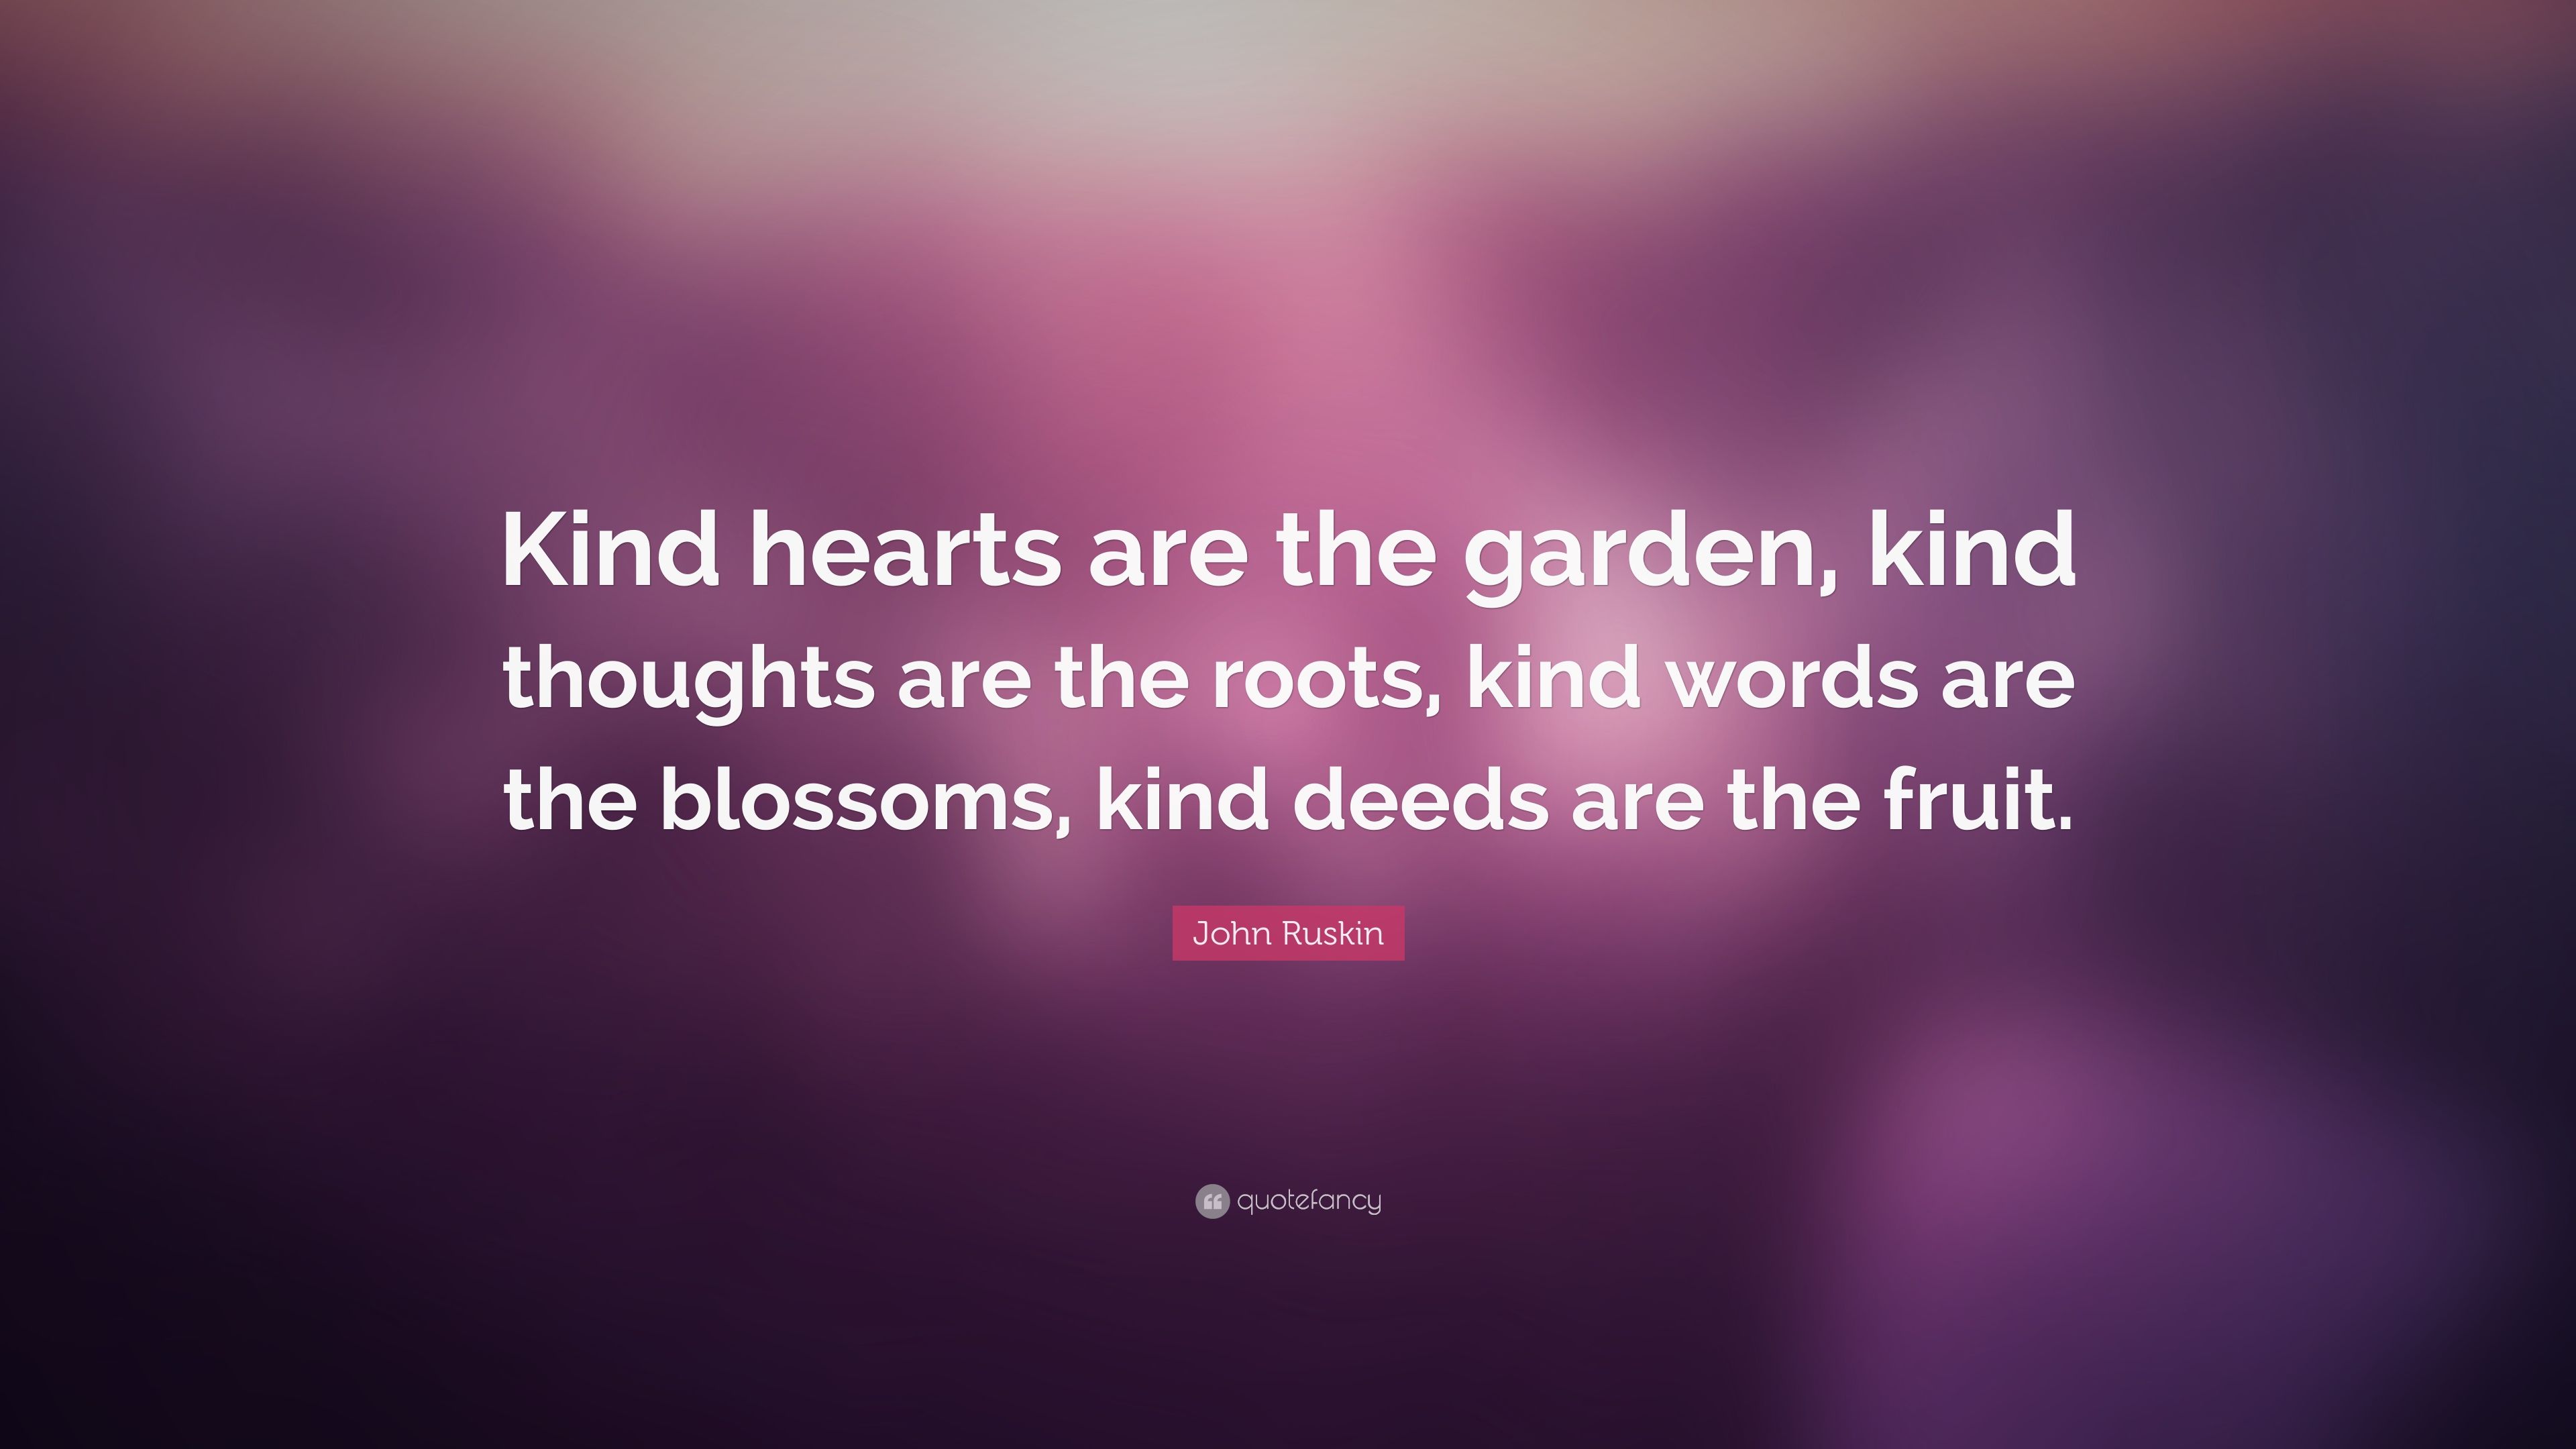 John Ruskin Quote: “Kind hearts are the garden, kind thoughts are